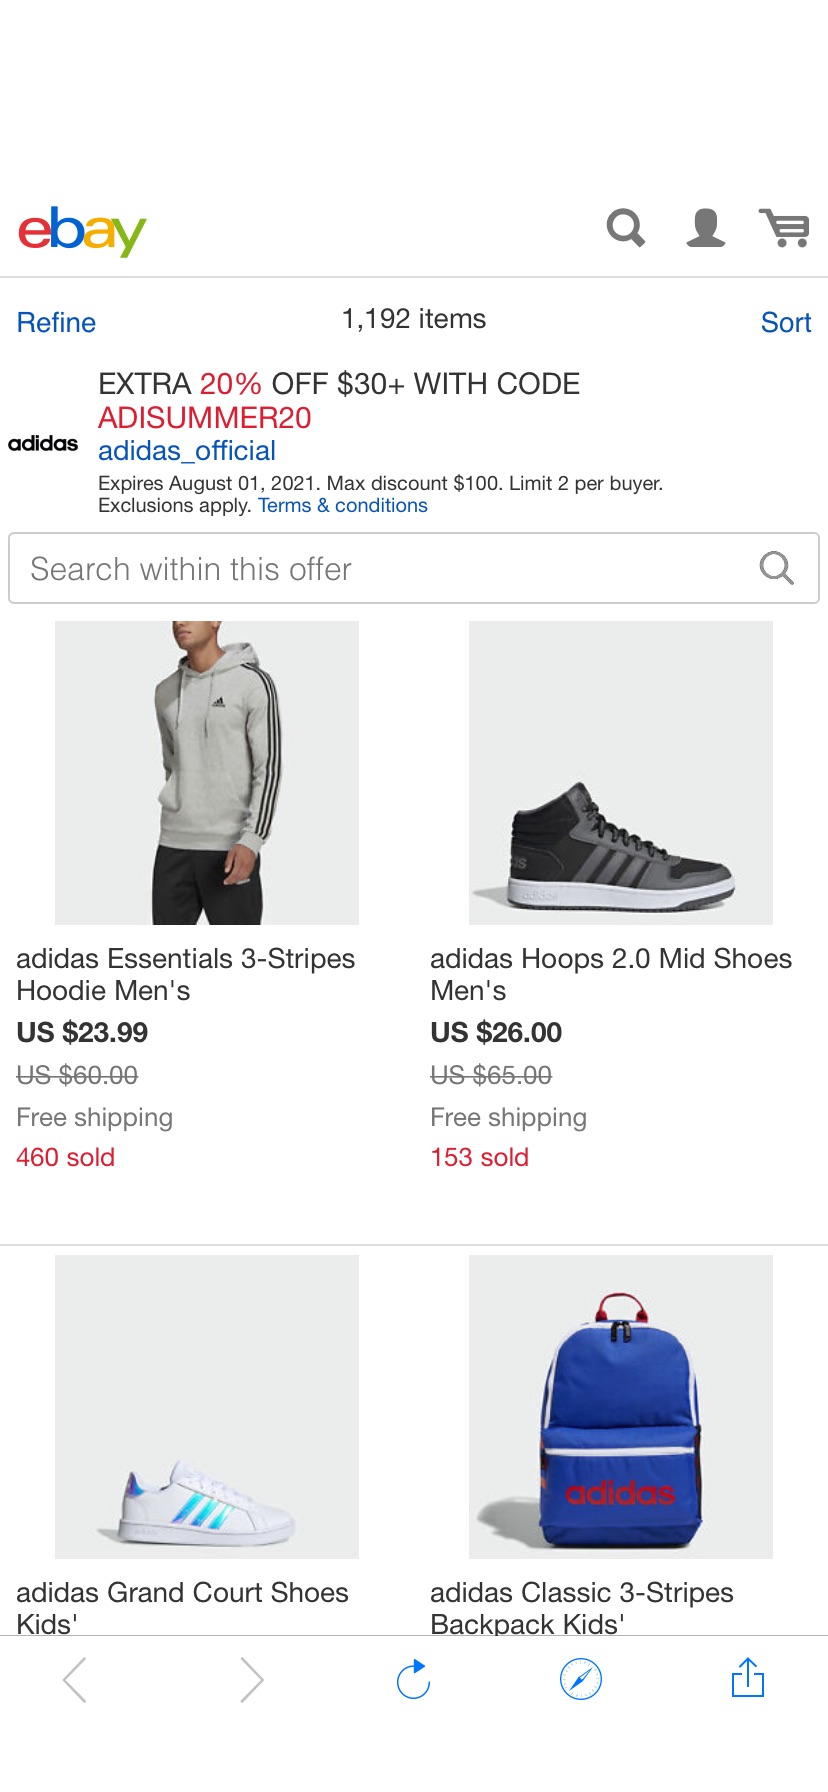 Extra 20% off $30 or more with code ADISUMMER20 - For all your summer favorites! - eBay adidas额外八折